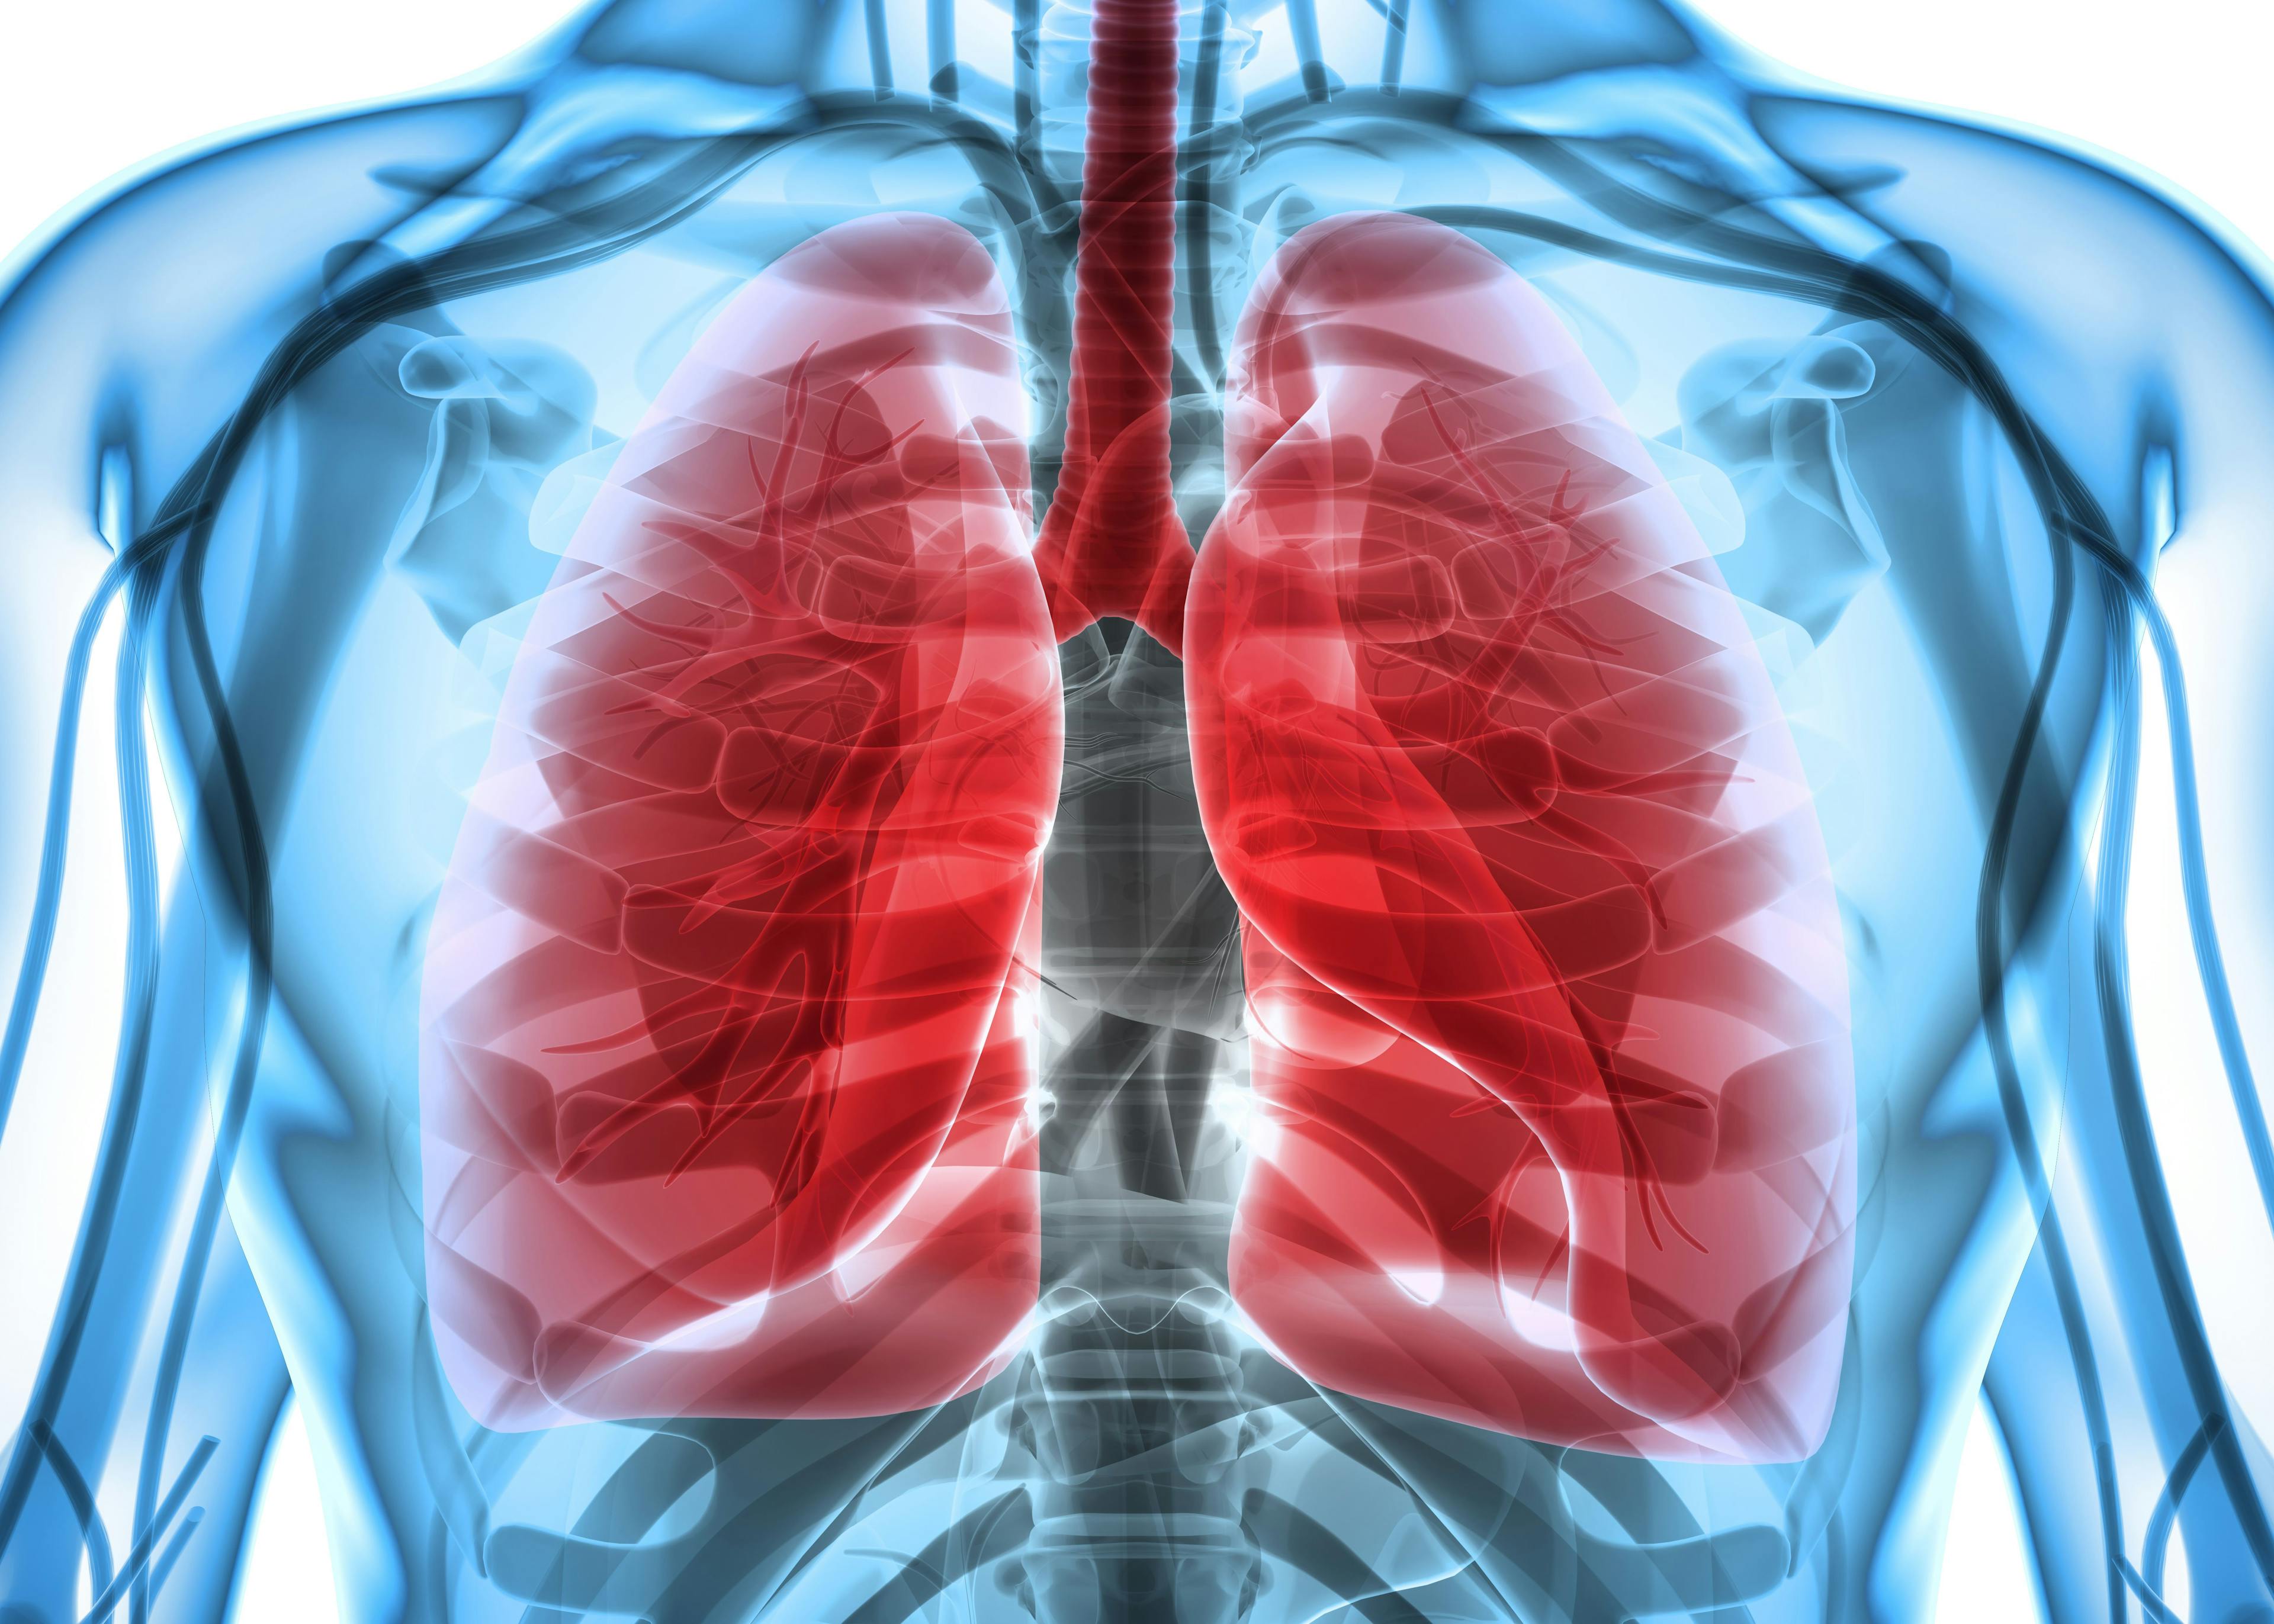 Study Finds Peer Support Associated With Fewer Acute Care Visits in Patients With COPD